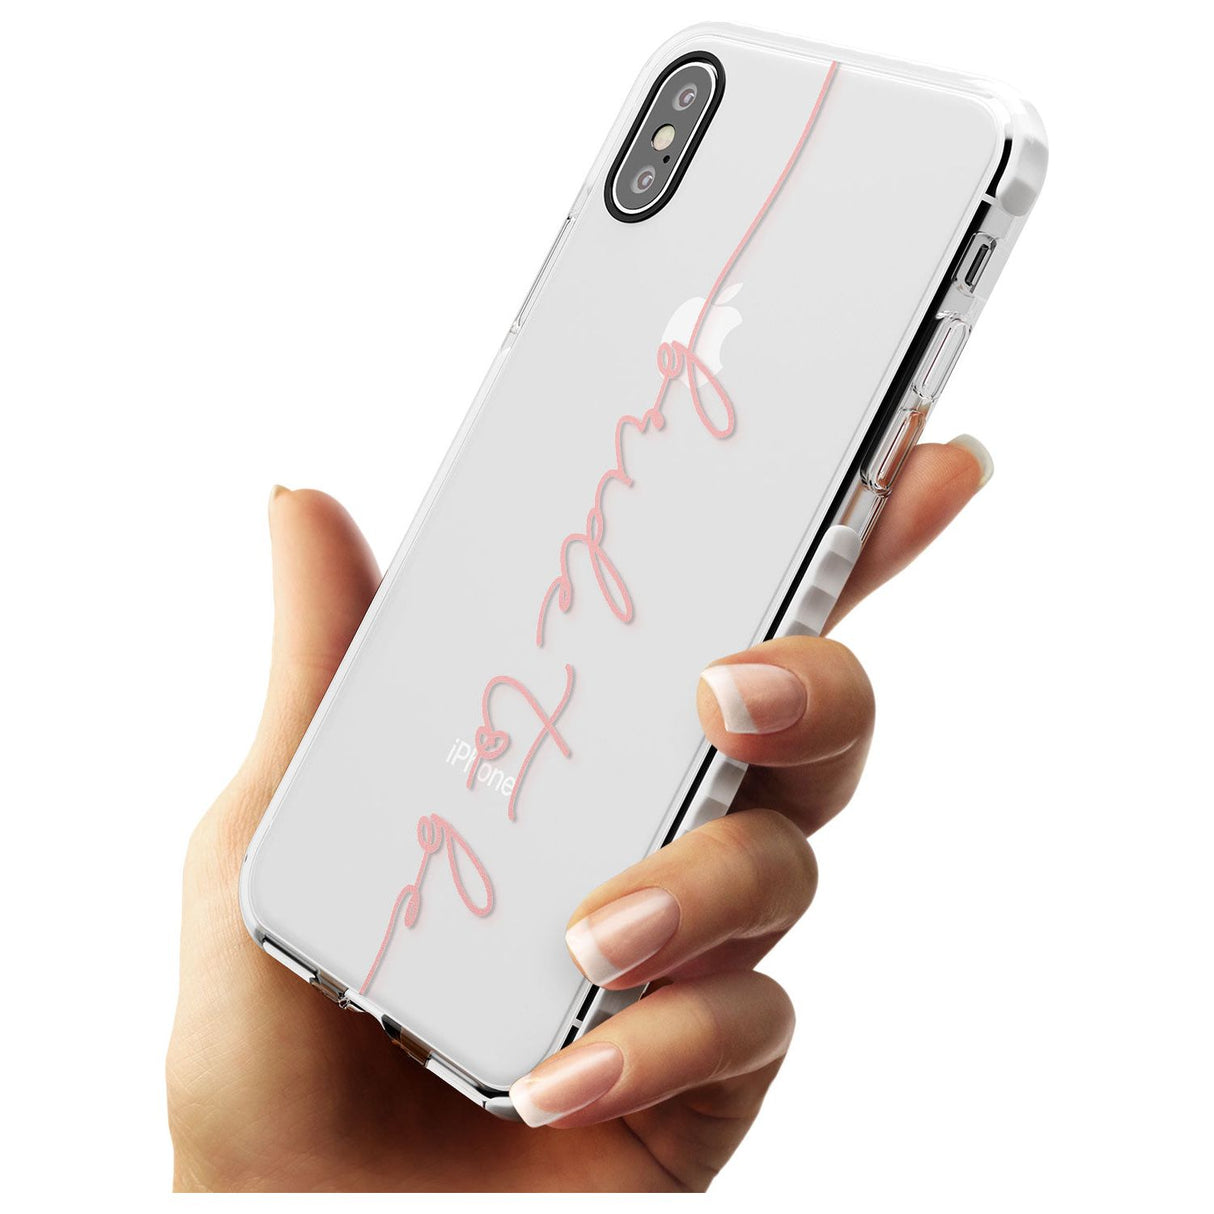 Bride to Be - Transparent Wedding Design Impact Phone Case for iPhone X XS Max XR